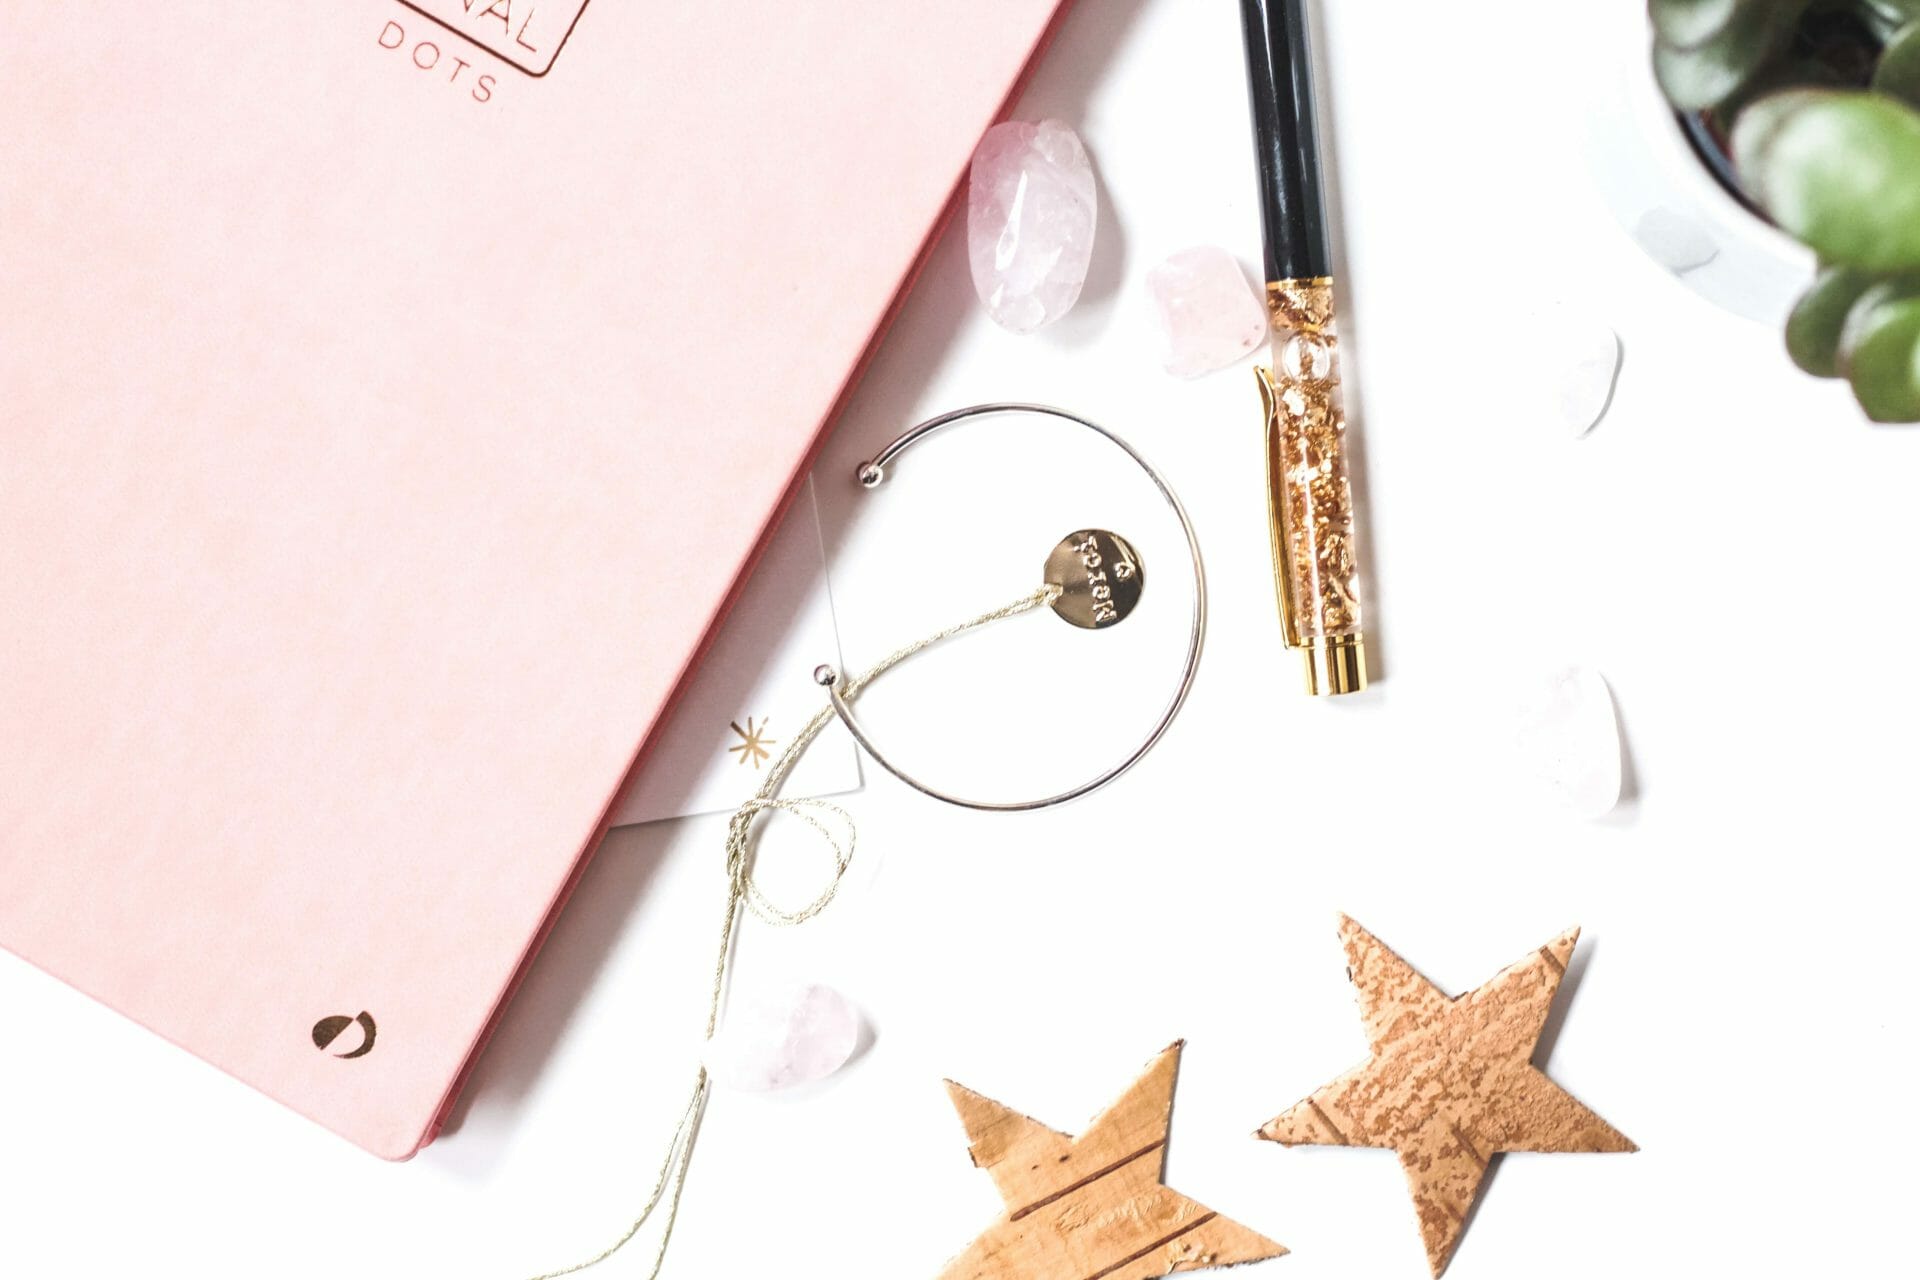 Cute, pink bullet journal that would make the perfect gift!